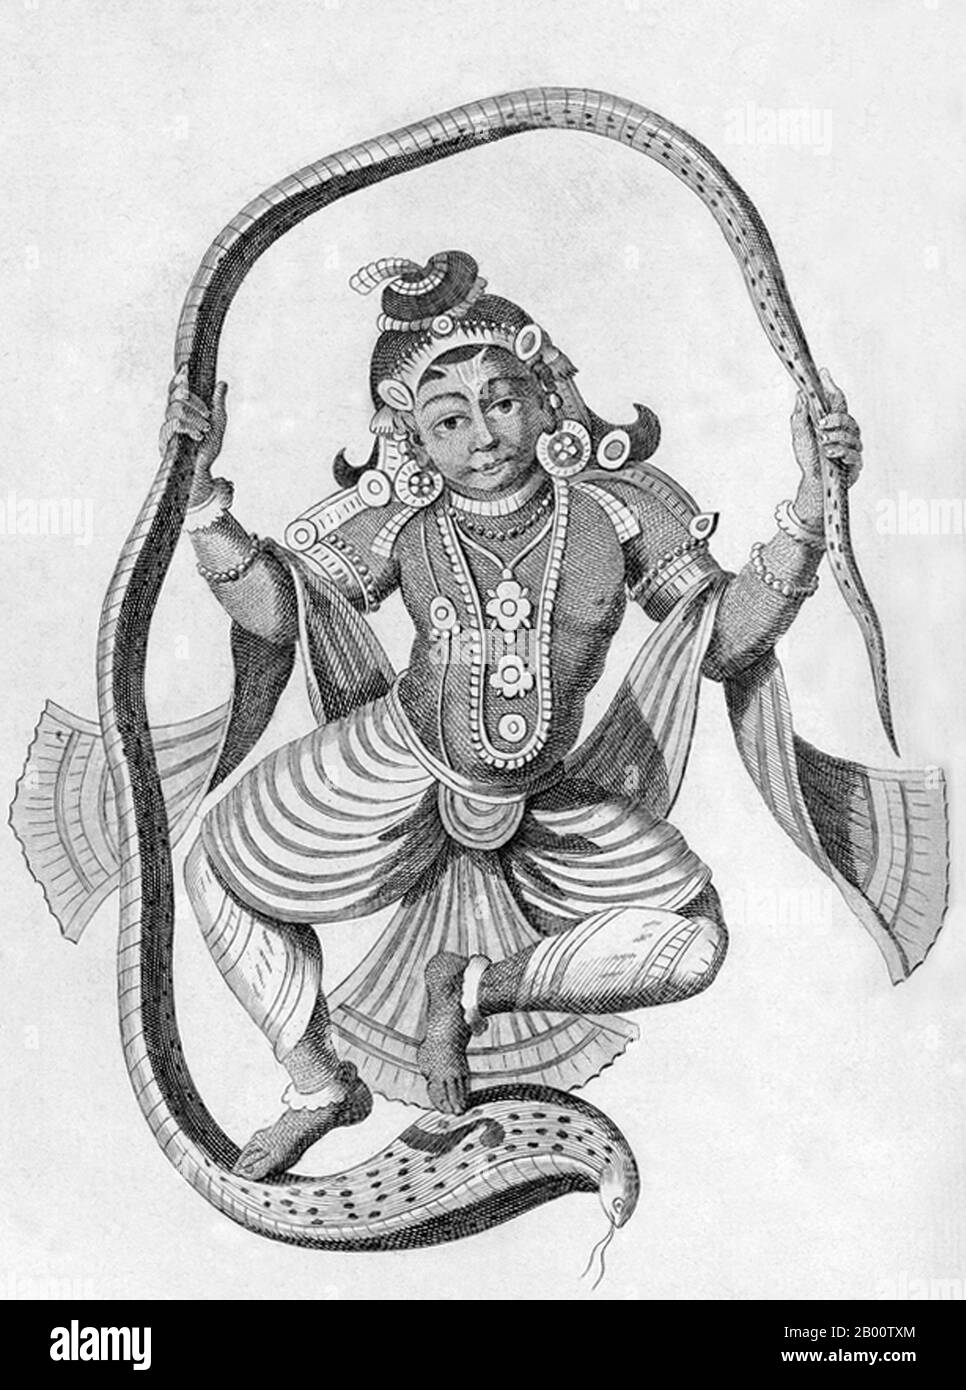 India: 'Krishna Conquering Kalinga (Kaliya) the Serpent'. Illustration by Pierre Sonnerat (1748-1814), 1782.  Pierre Sonnerat (1748-1814) was a French naturalist and explorer who made several voyages to southeast Asia between 1769 and 1781. He published this two-volume account of his voyage of 1774-81 in 1782.  Volume 1 deals exclusively with India, whose culture Sonnerat very much admired, and is especially noteworthy for its extended discussion of religion in India, Hinduism in particular. The book contains engravings based on Sonnerat's drawings. Stock Photo